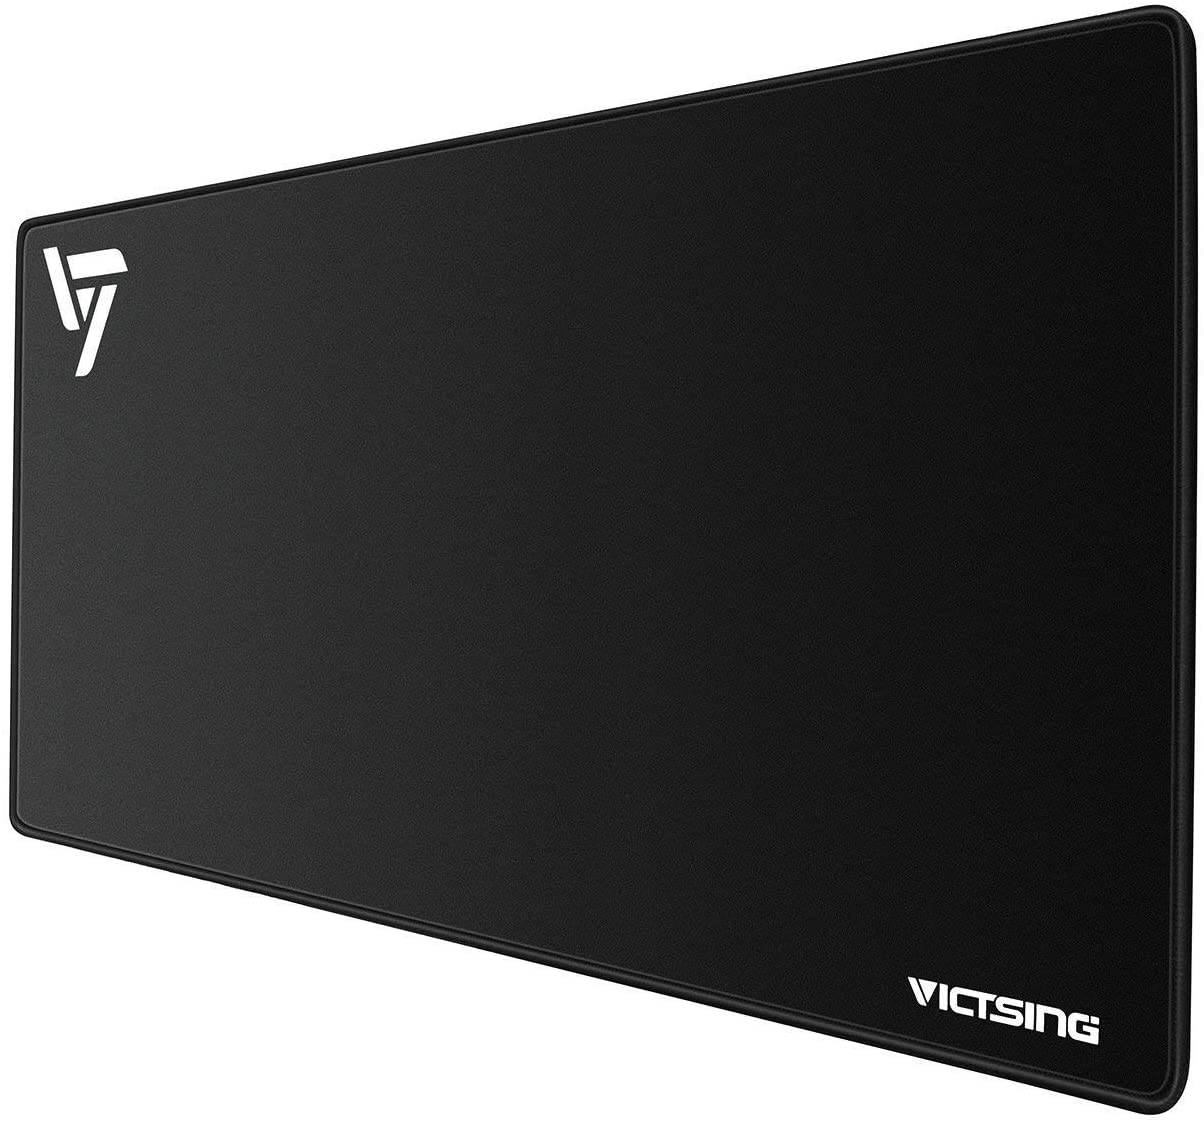 Desk Pad Keyboard and Mouse Mat by VicTsing